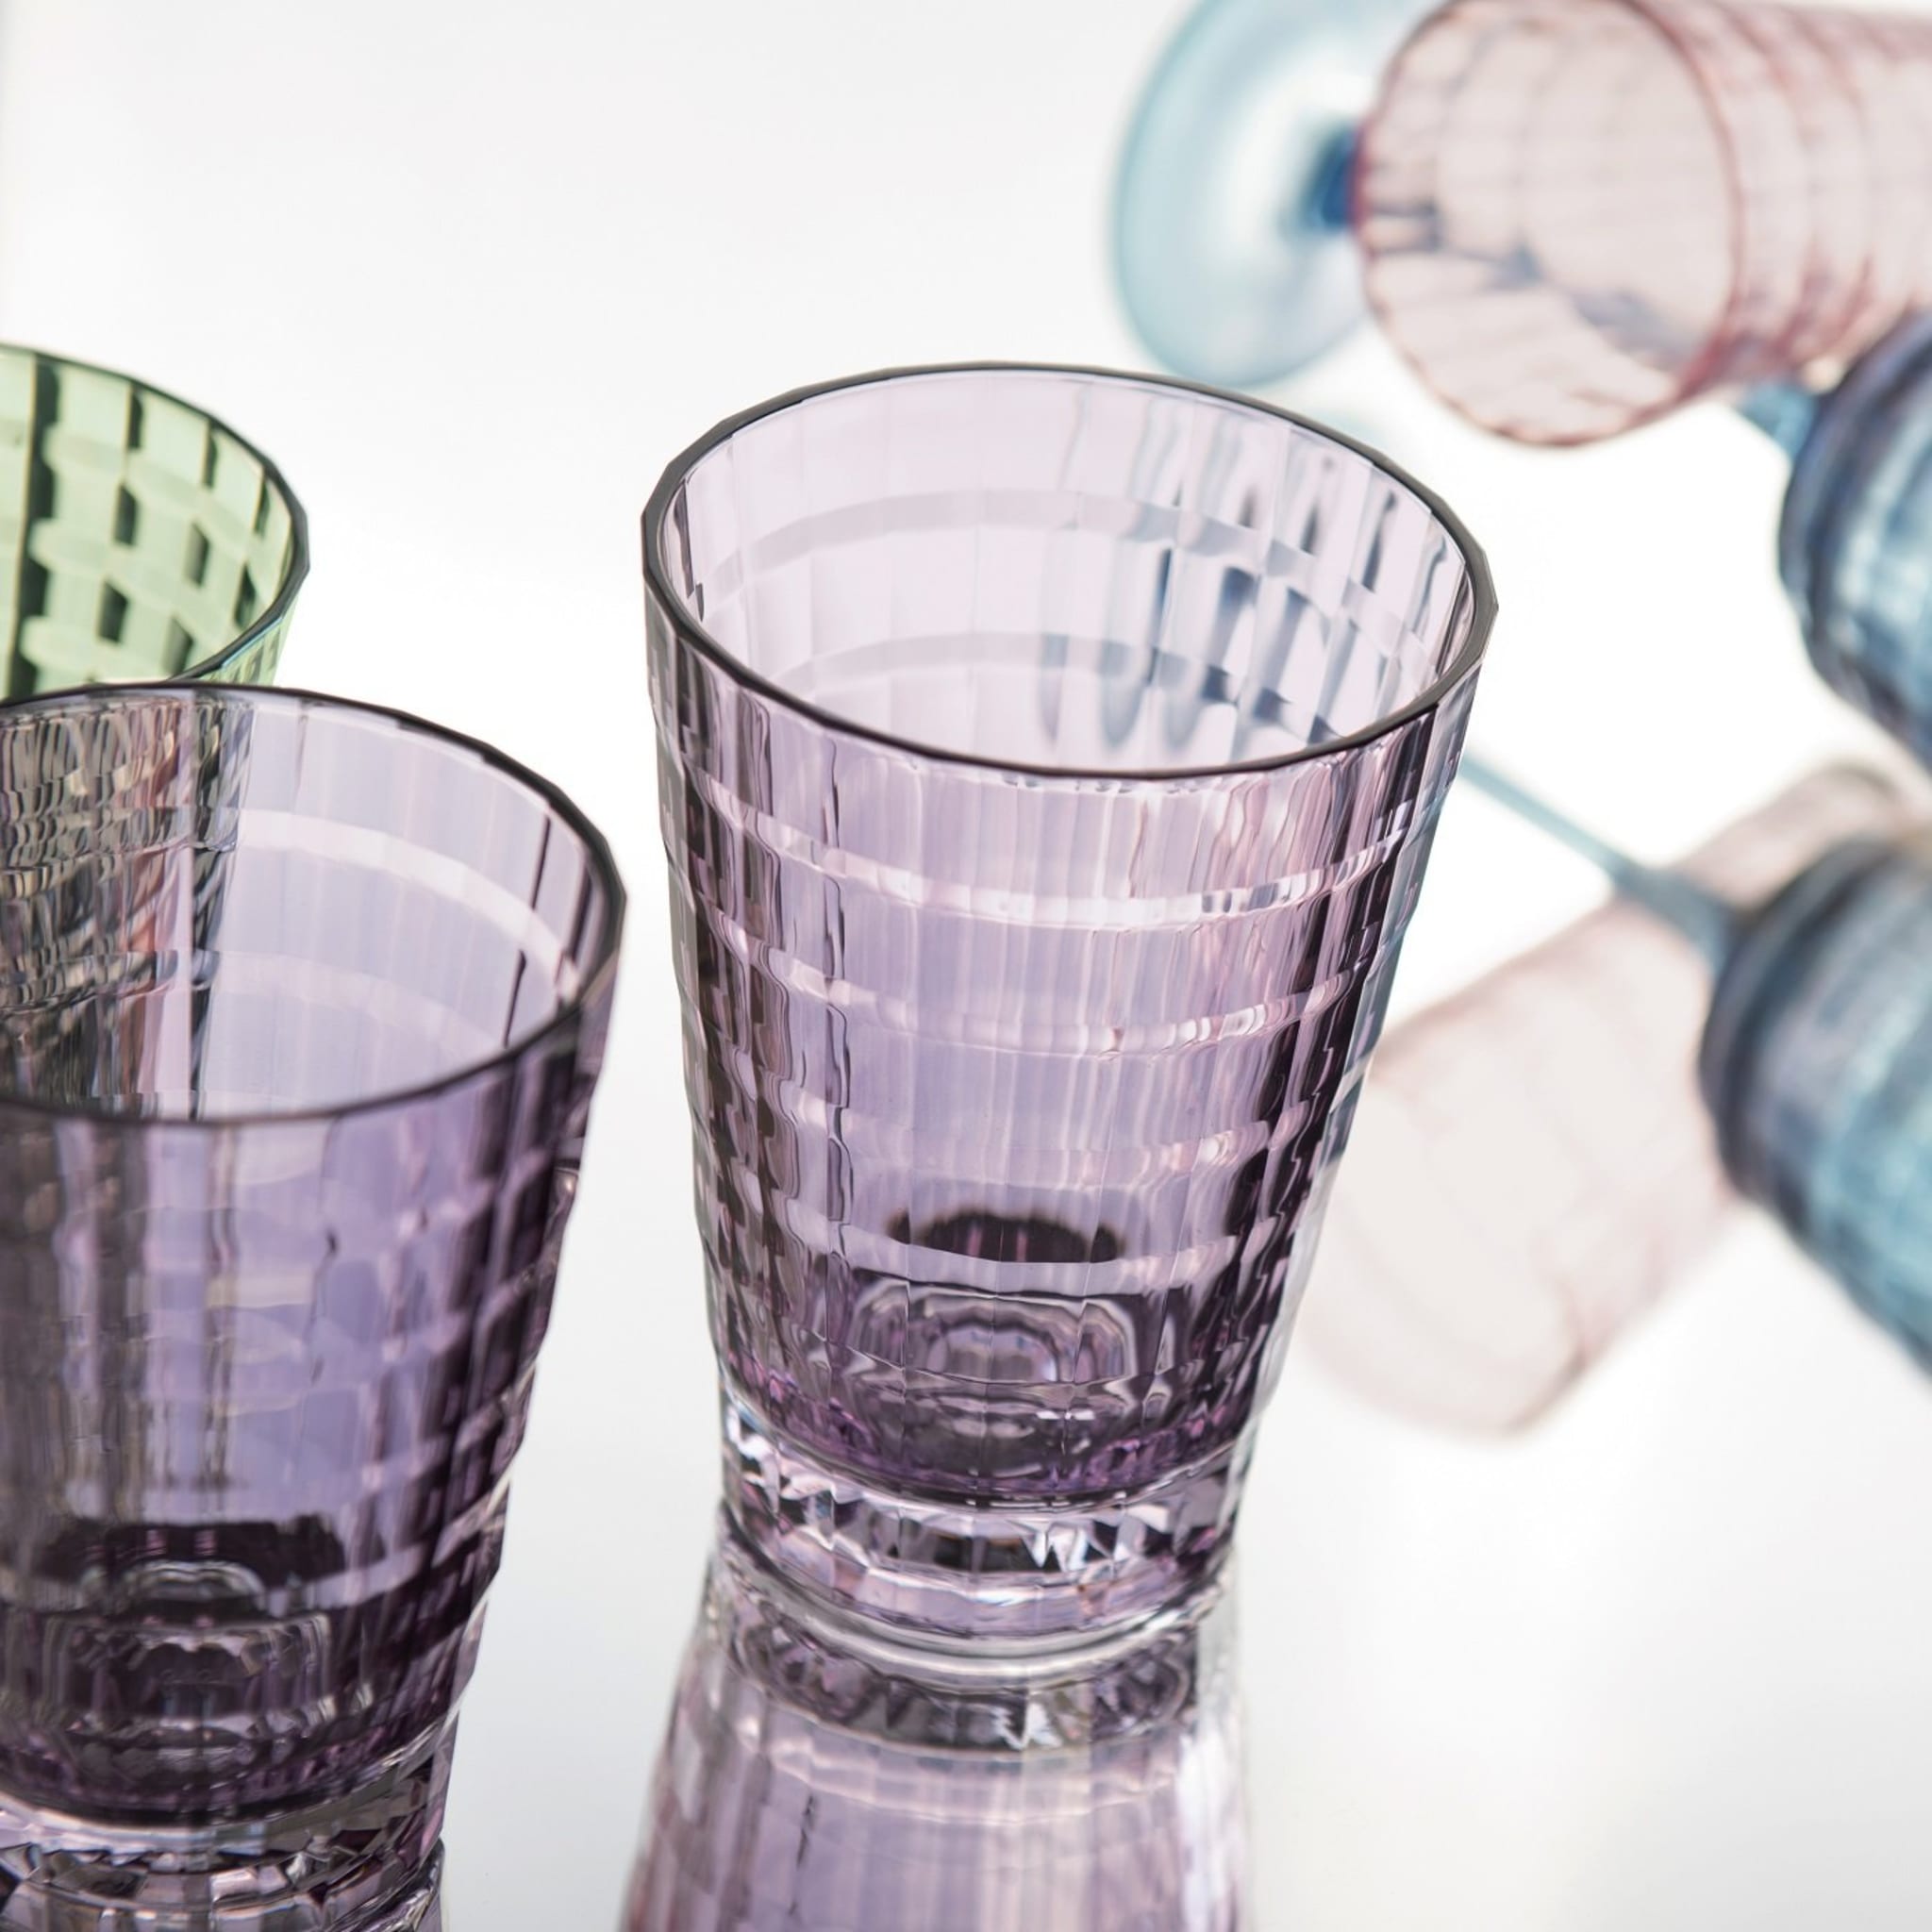 Tokyo Multicolor Set of 6 Drinking Glasses - Alternative view 1